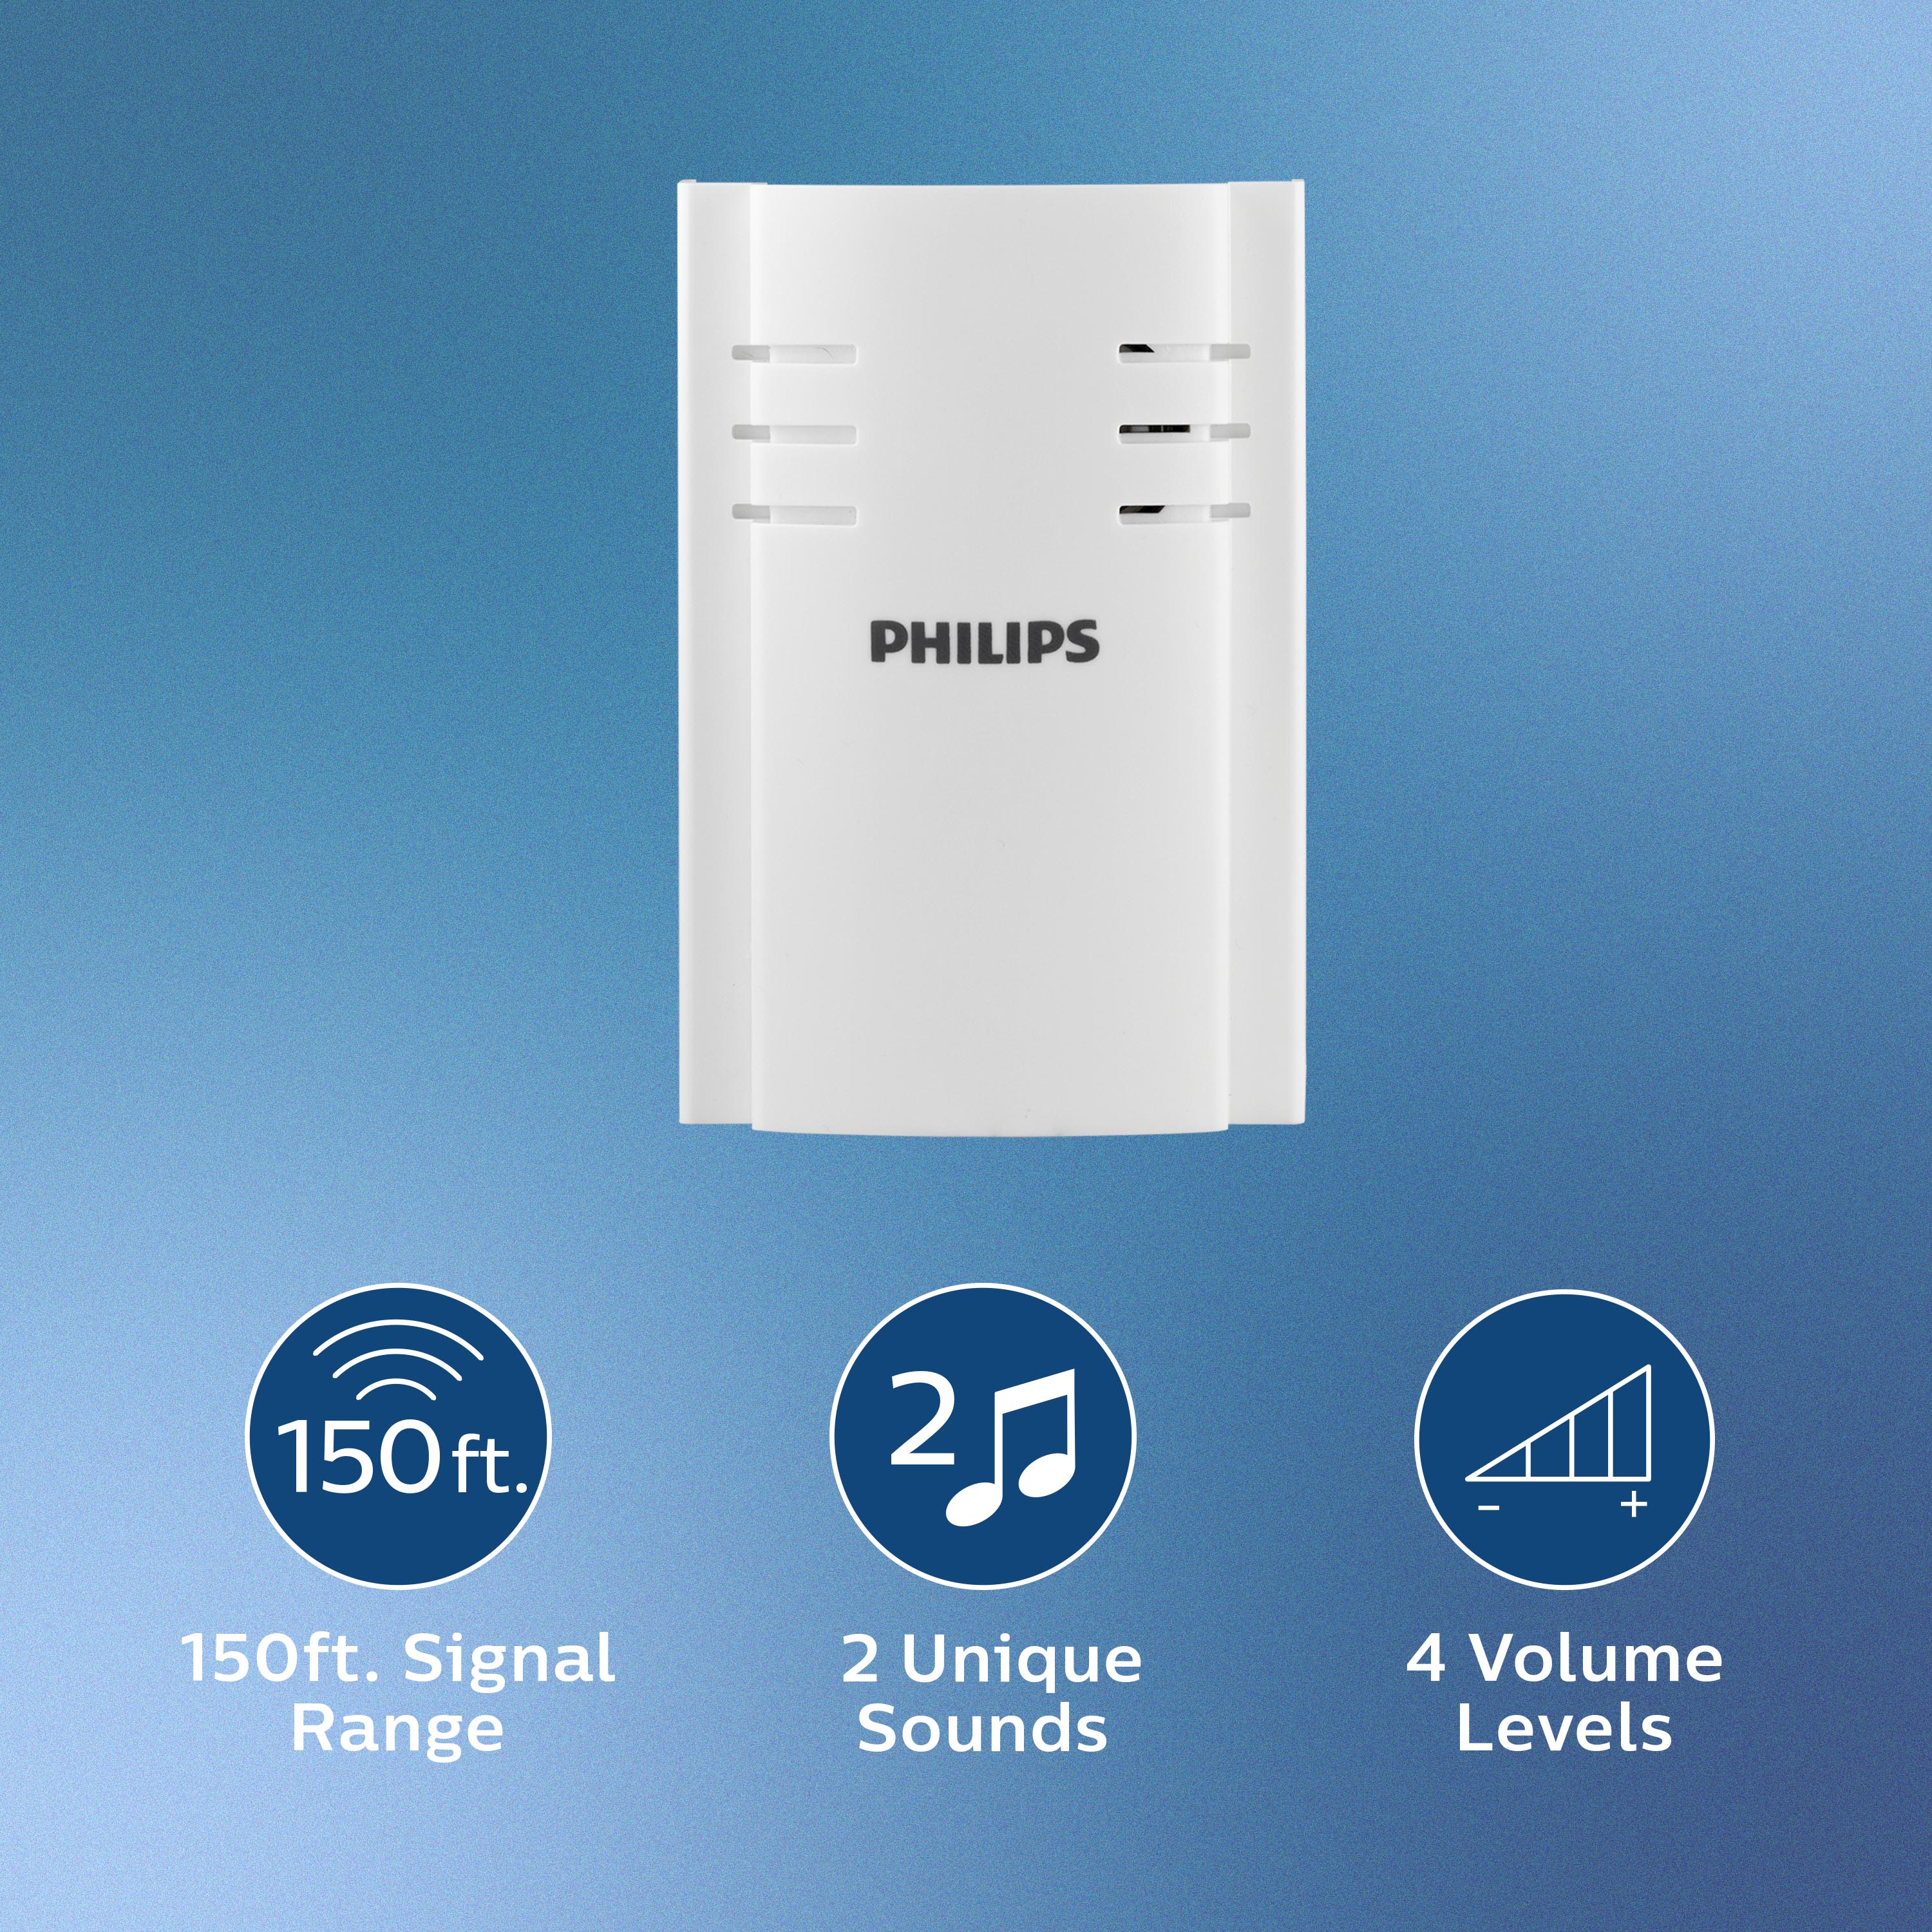 Philips Plug-in 2-Melody Doorbell Kit, White, DES2120W/27 - image 5 of 9